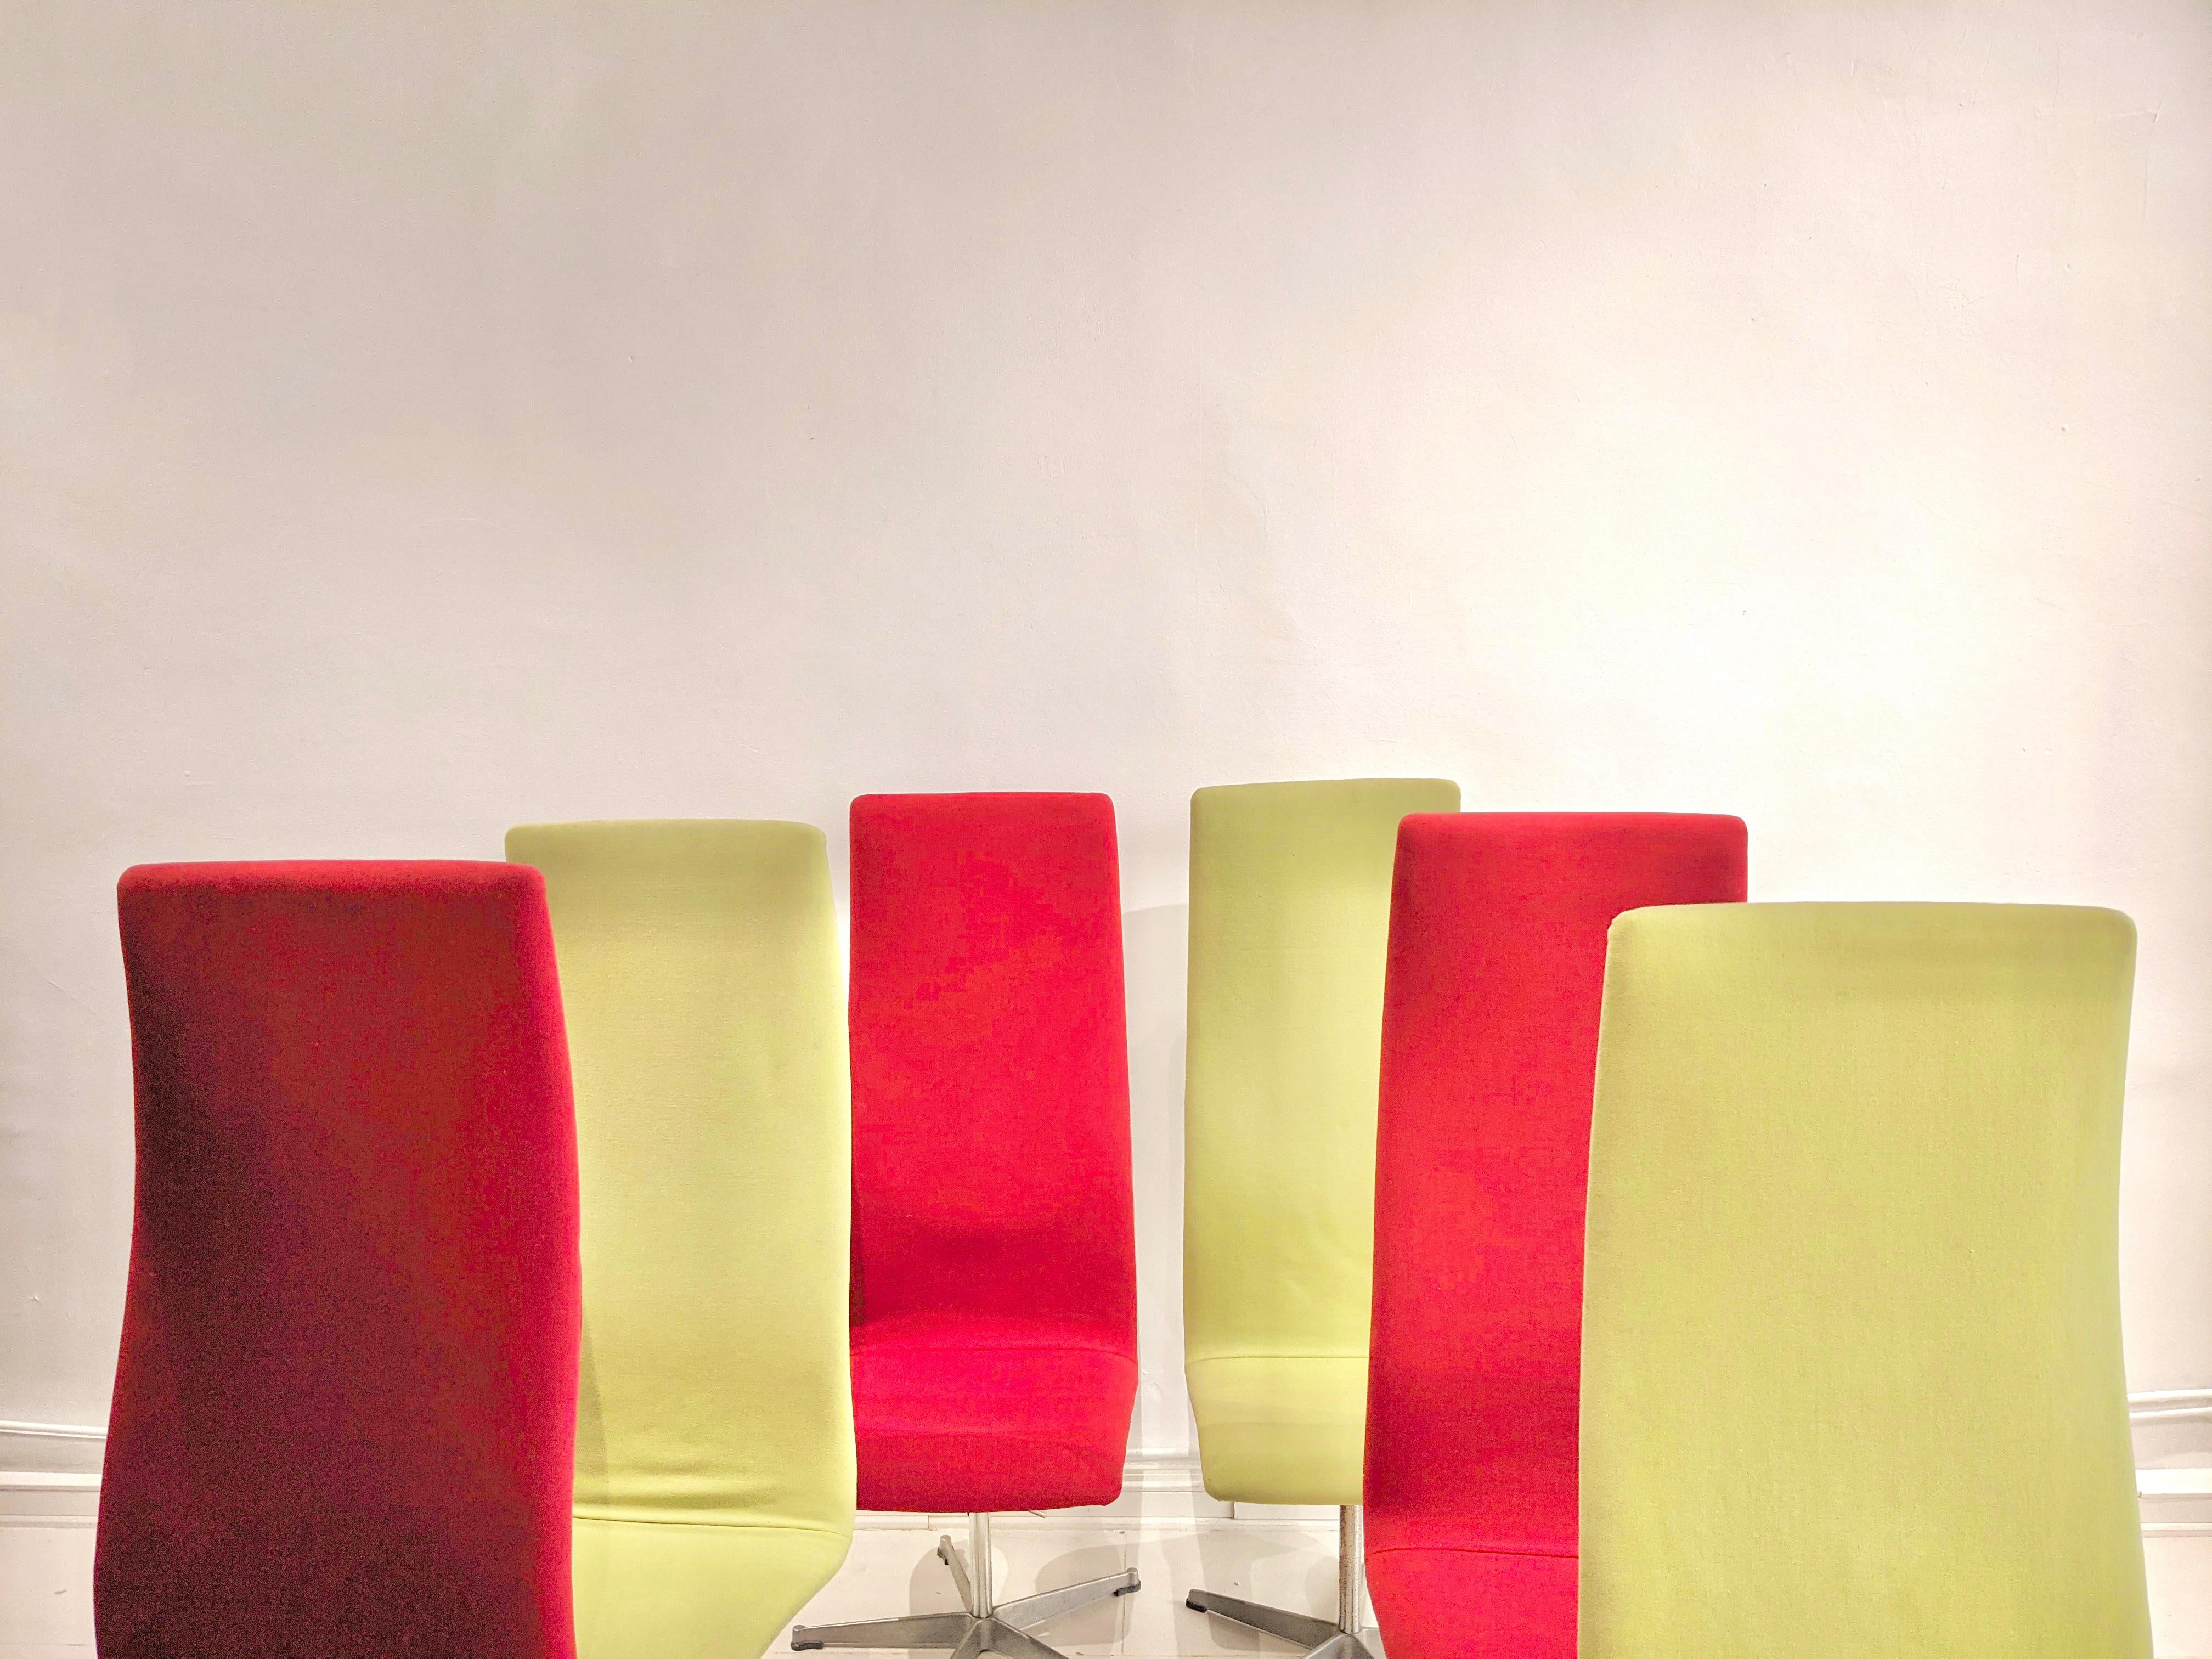 Set of 6 Oxford chairs by Arne Jacobsen for Fritz Hansen. Green and red fabric. 1970's. Very good condition.
  